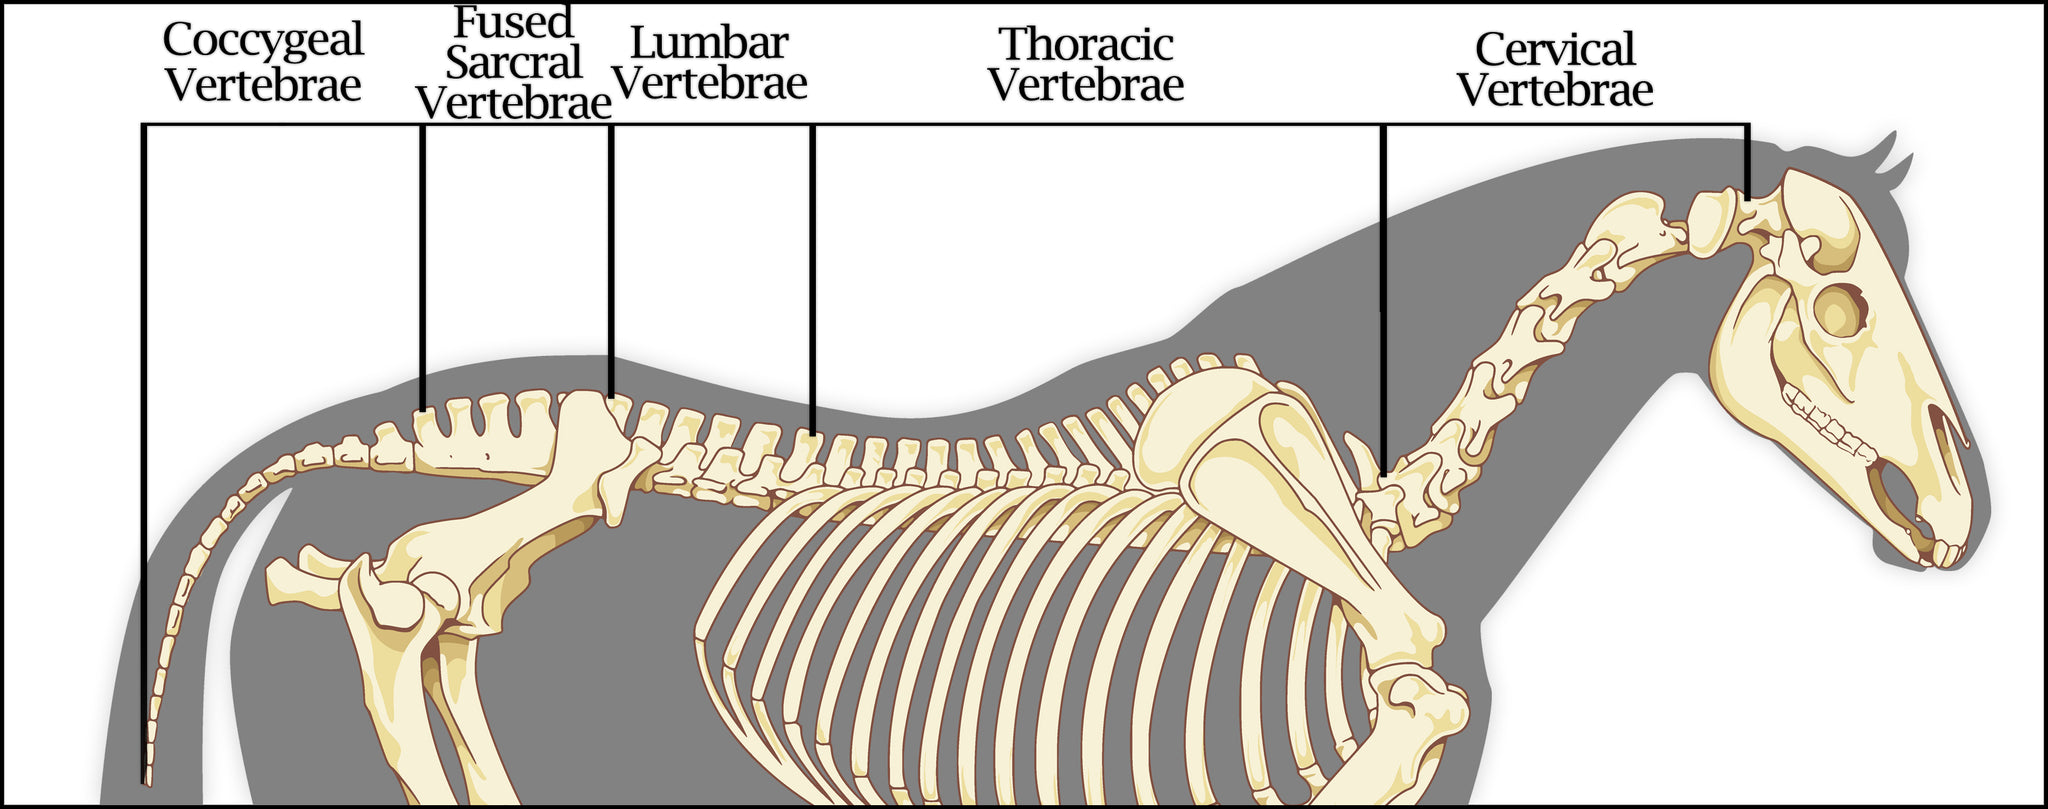 Equine Skeletal Systems: The Horse's Back